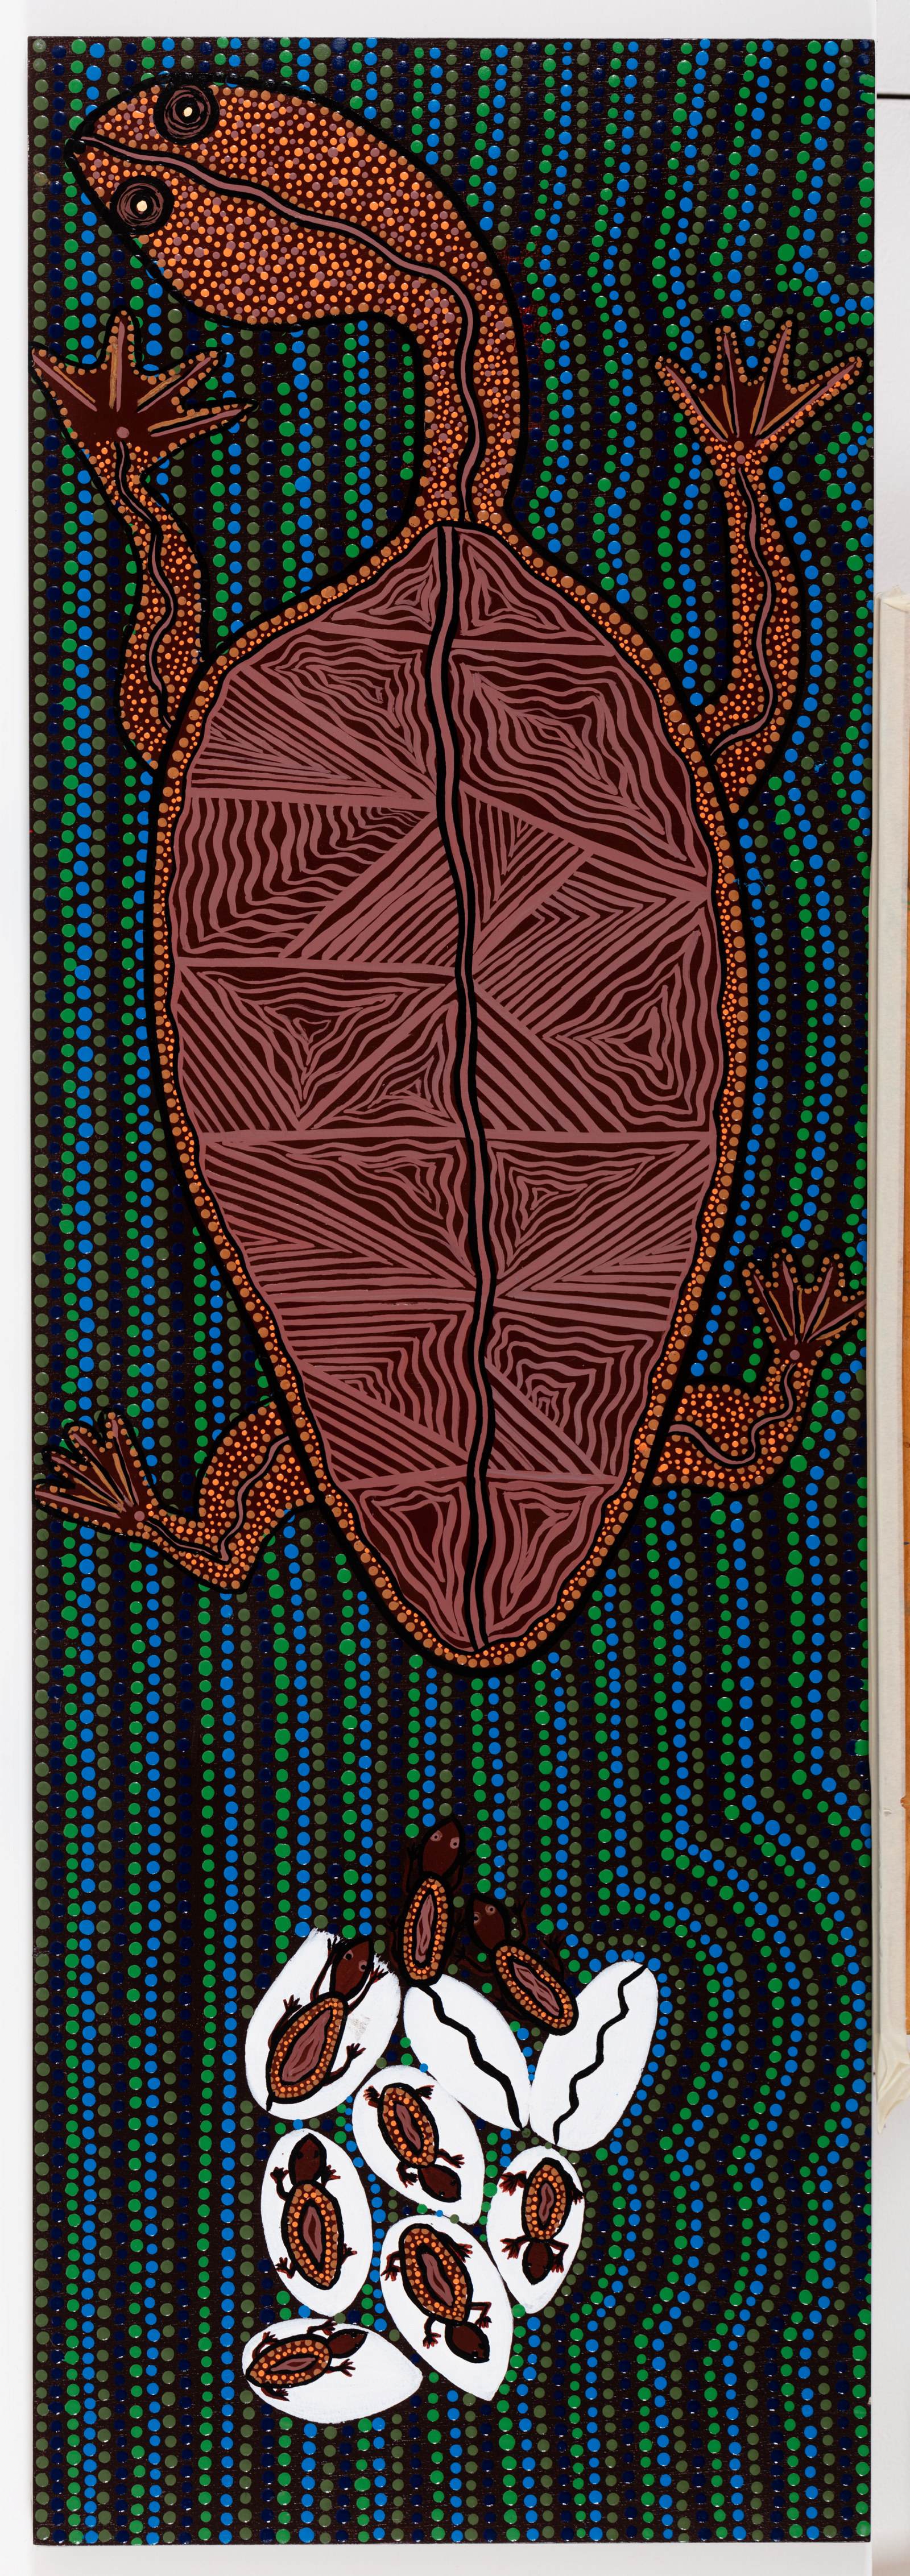 Turtle hatching season, Dereke Brown and Allison Day, 2022, acrylic on plywood board, 122.5cm x 41cm
This is the start of new life. When we were young, our father taught us how to track turtles and discover their eggs in the sandhills of Coomaditchie Lagoon. These are special memories with our father and his teachings.